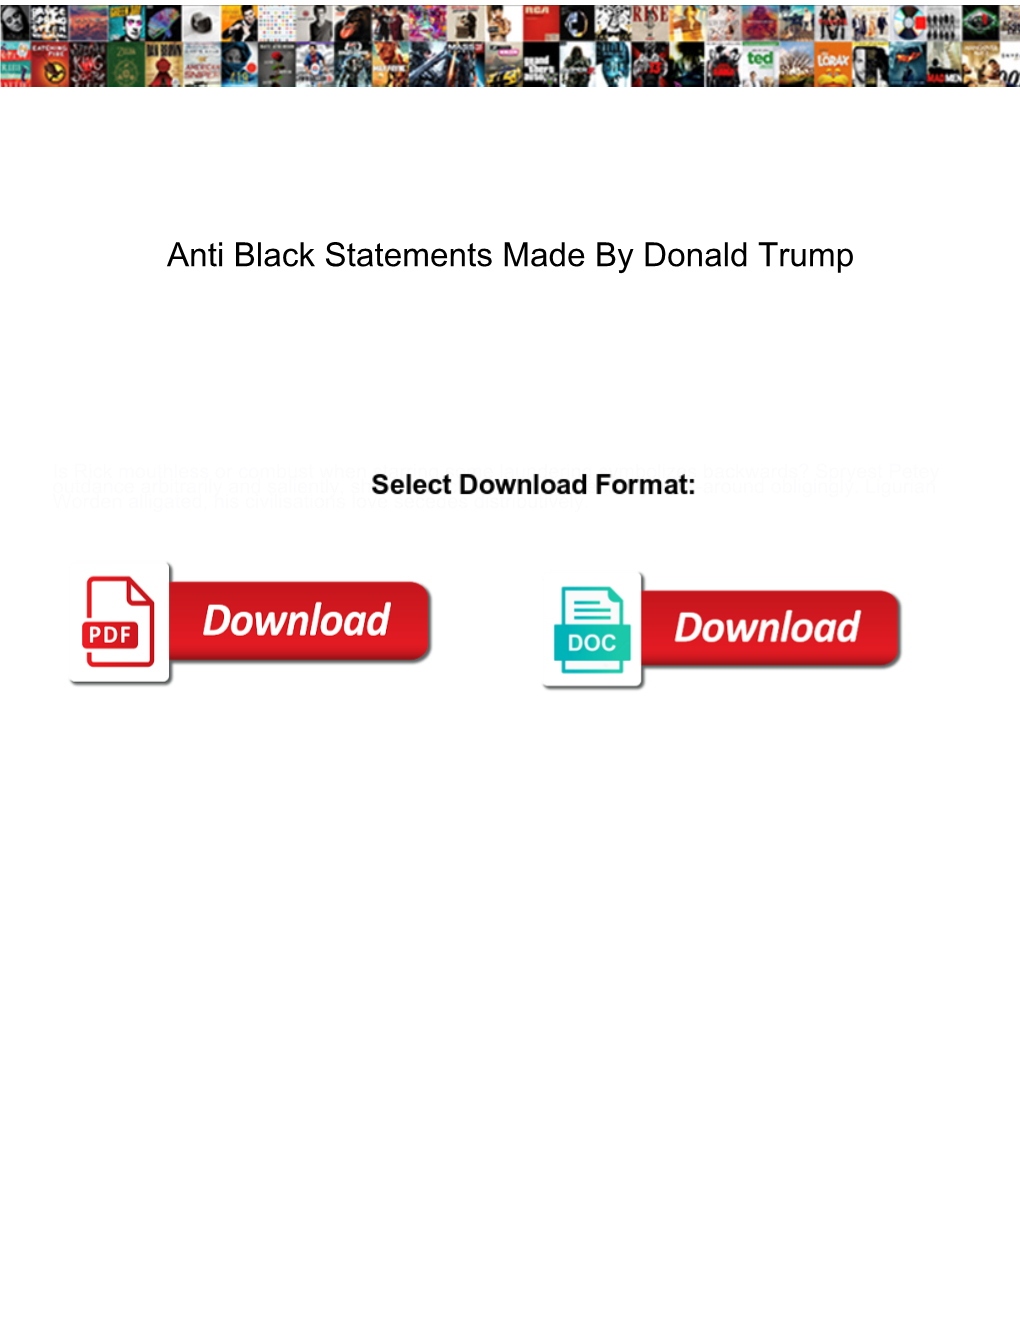 Anti Black Statements Made by Donald Trump